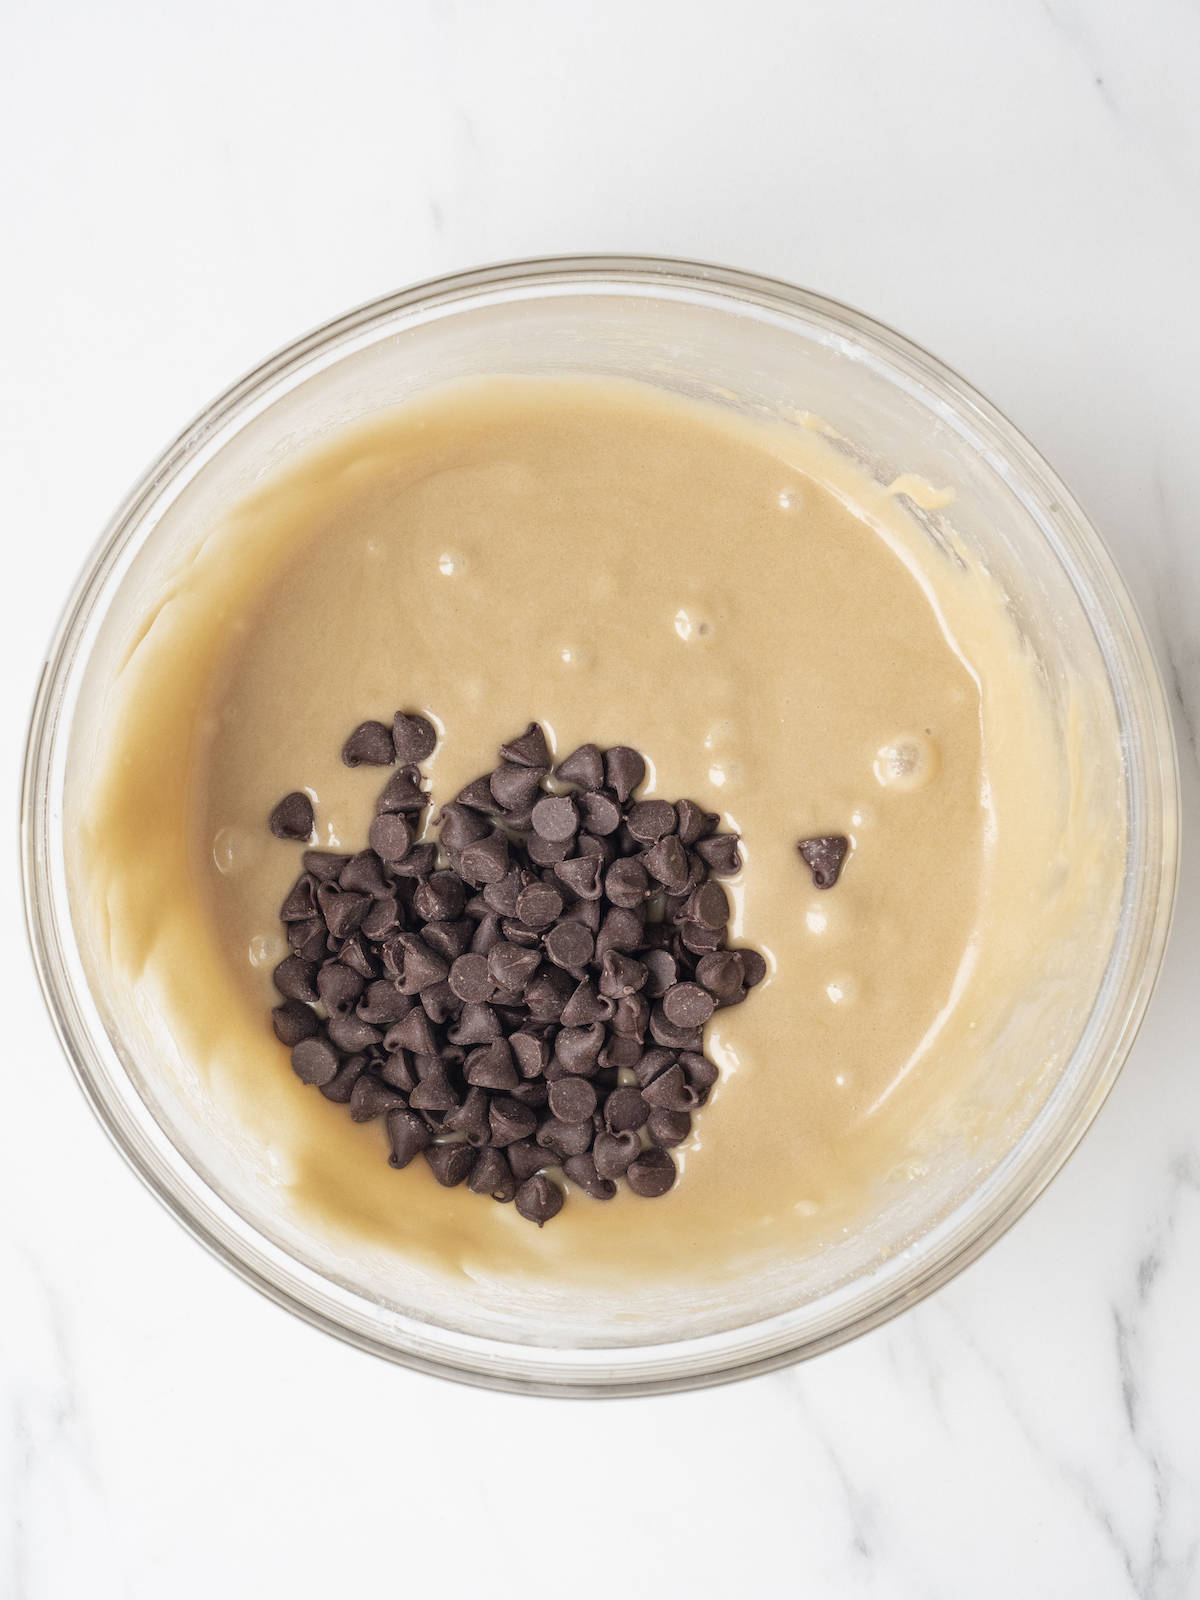 A glass mixing bowl with cookie dough batter with chocolate chips added.